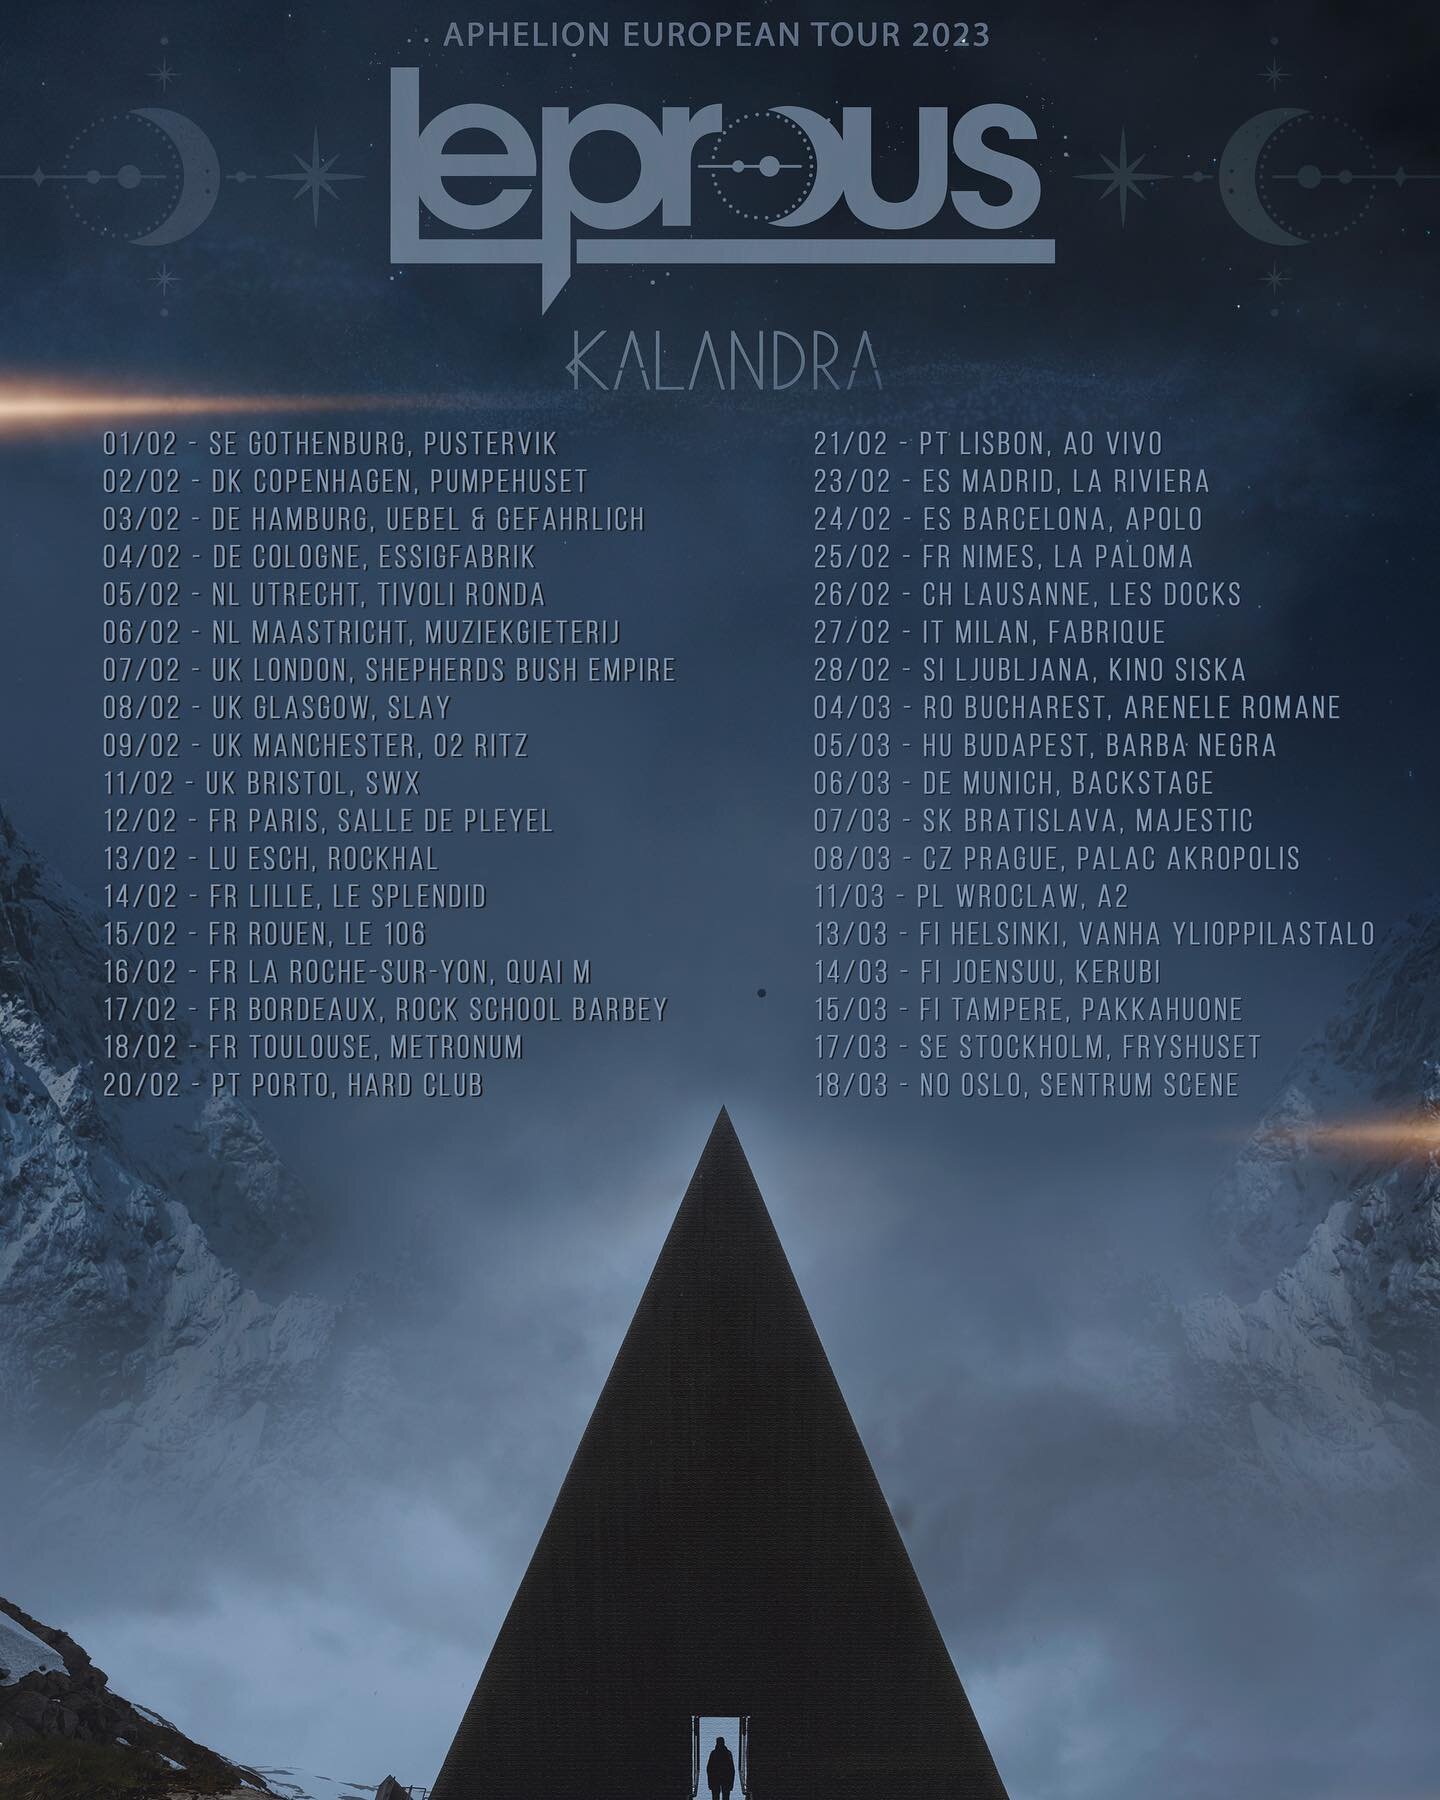 Four more shows has been added to the upcoming EU tour we&rsquo;re doing with @leprousofficial next year Feb/Mar 2023! 

06/02 - NL Maastricht, Muziekgieterij 🇳🇱
27/02 - IT Milan, Fabrique 🇮🇹
04/03 - RO Bucharest, Arenele Romane 🇷🇴
06/03 - DE M